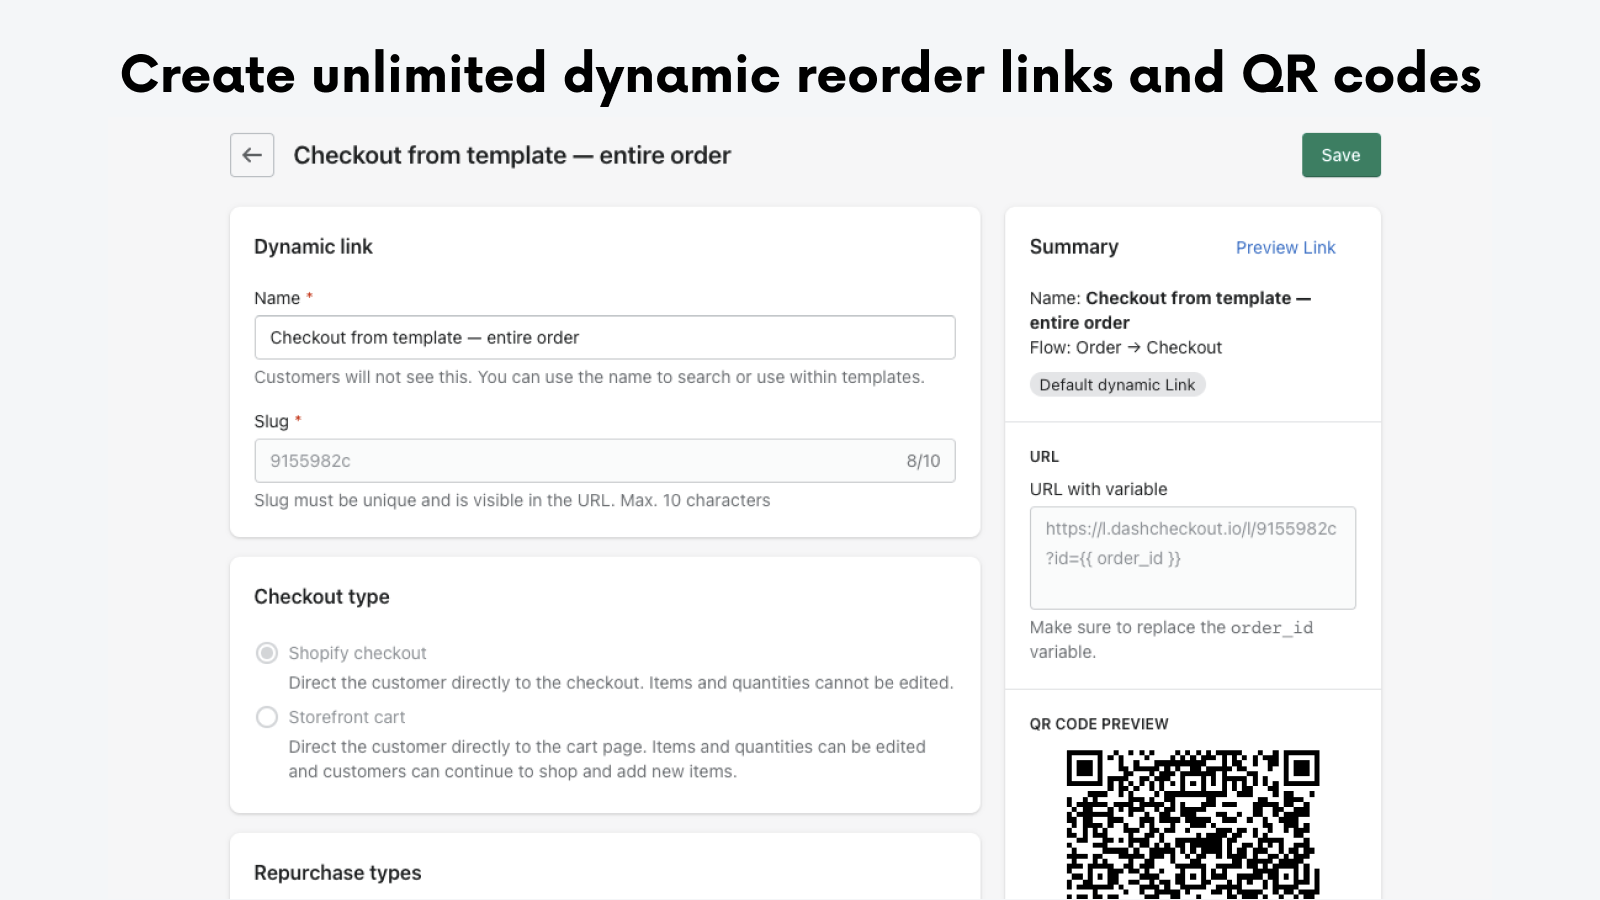 Create unlimited dynamic reorder links and QR codes